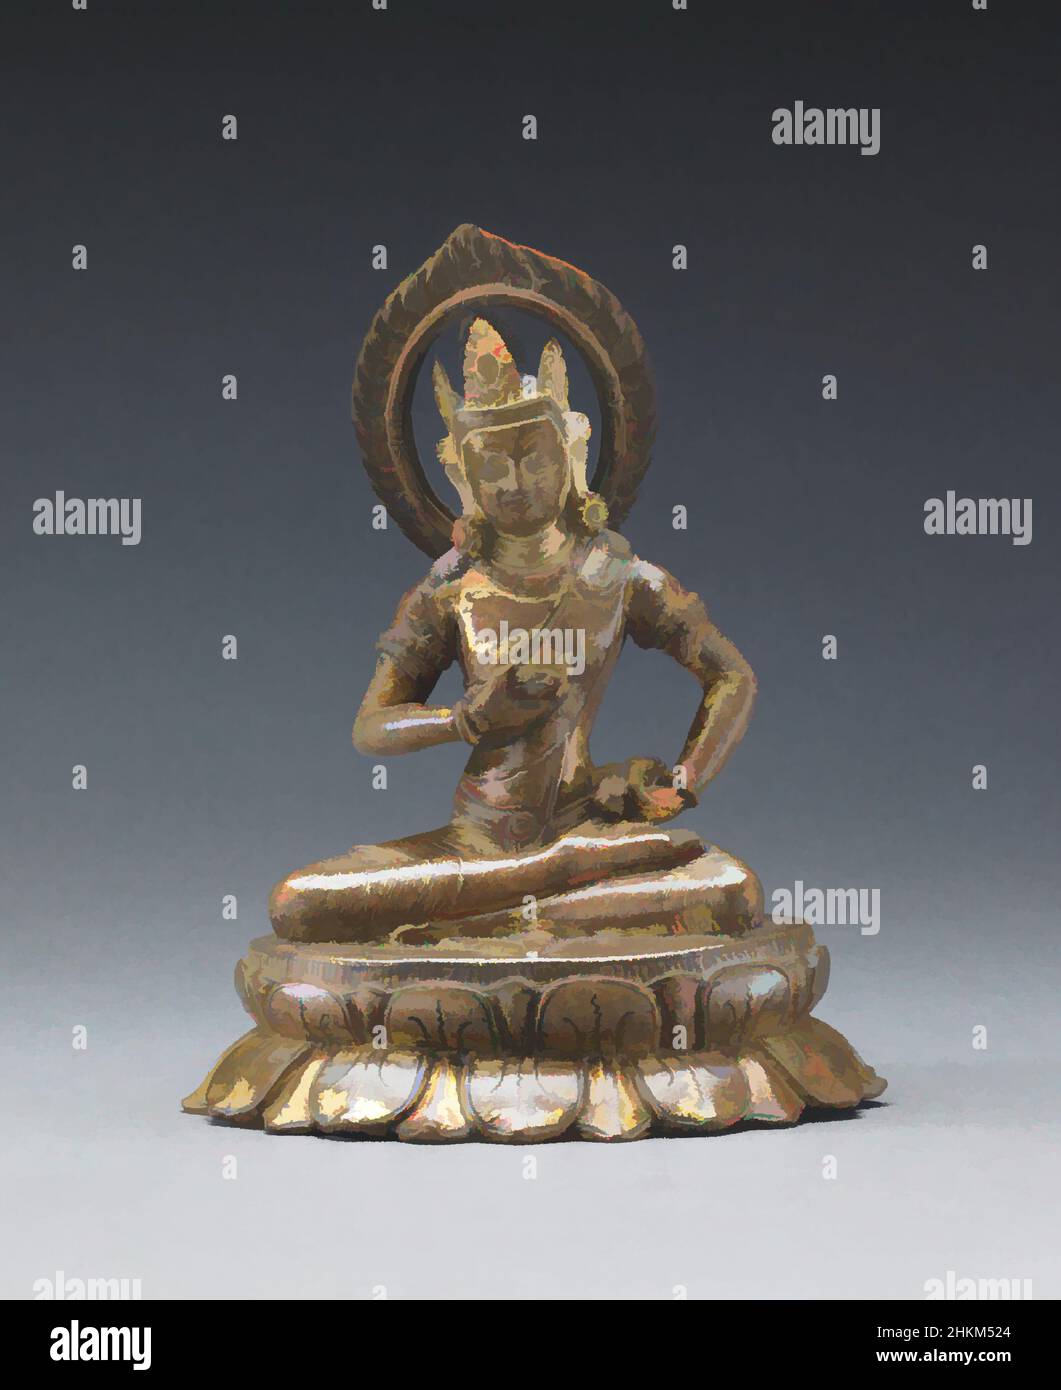 Art inspired by Seated Vajrasattva, Nepalese, Transitional period, 879-1200, 11th century, Copper alloy with gilding, Nepal, Asia, Metalwork, sculpture, 6 1/4 x 5 x 3 7/16 in. (15.9 x 12.7 x 8.7 cm, Classic works modernized by Artotop with a splash of modernity. Shapes, color and value, eye-catching visual impact on art. Emotions through freedom of artworks in a contemporary way. A timeless message pursuing a wildly creative new direction. Artists turning to the digital medium and creating the Artotop NFT Stock Photo